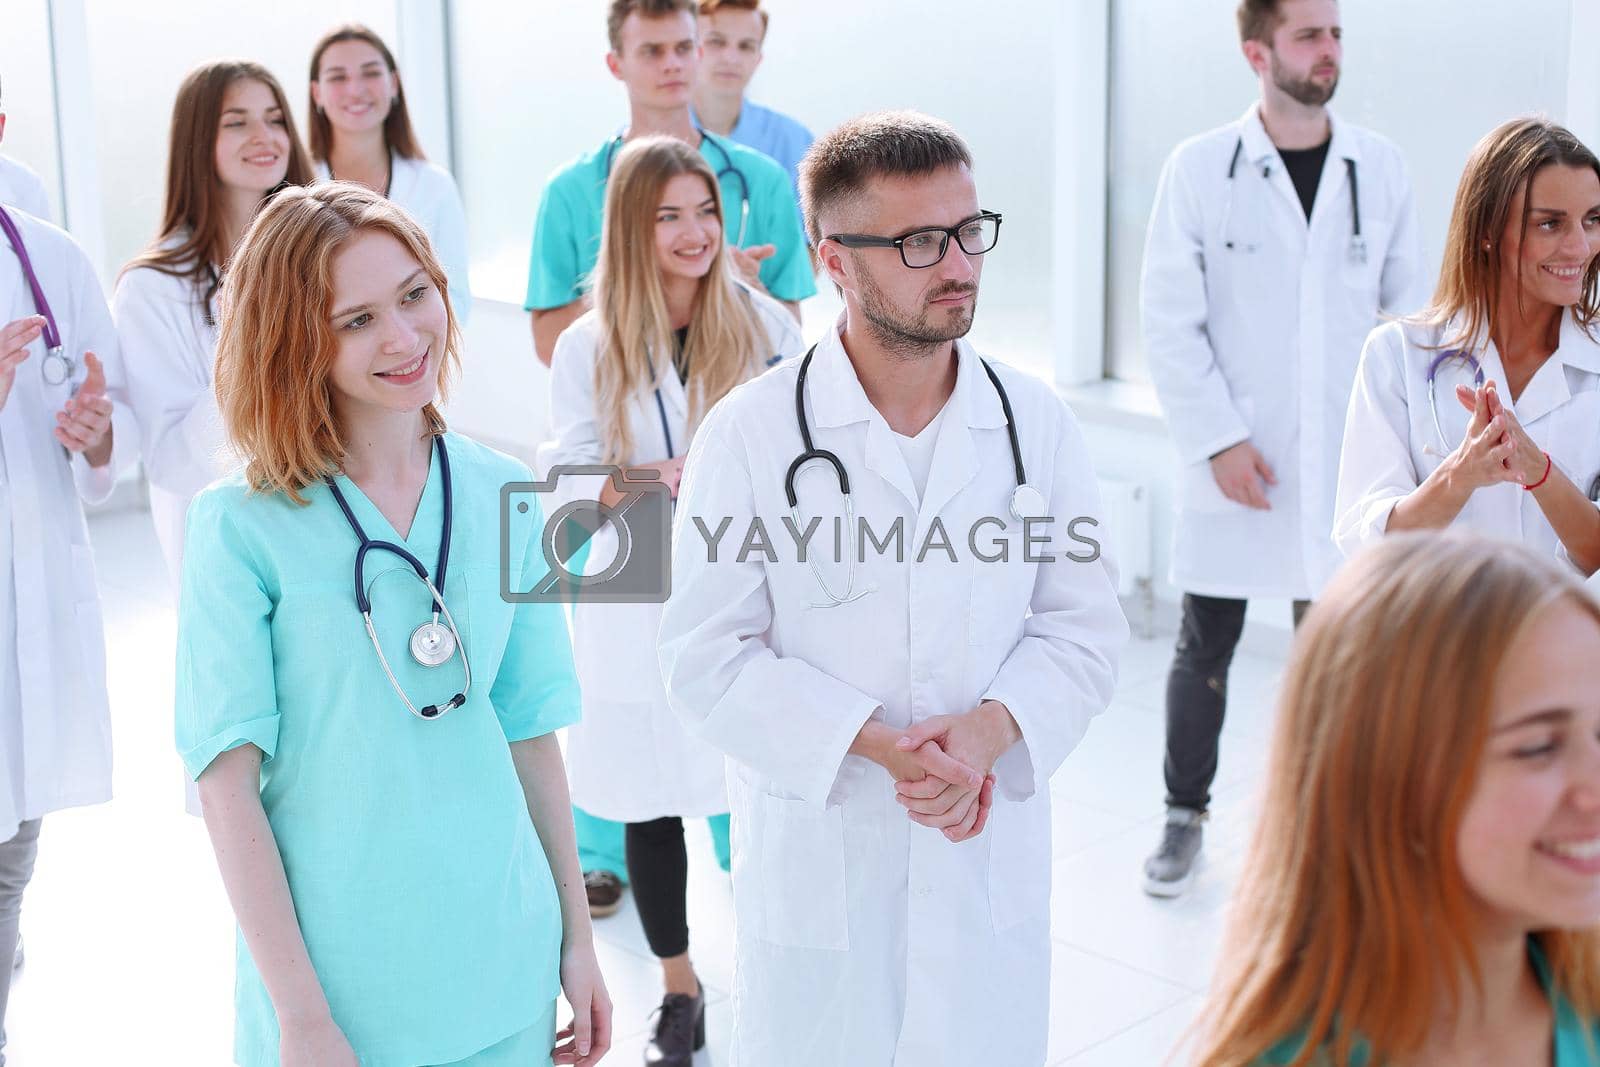 Royalty free image of group of medical professionals showing thumbs up by asdf